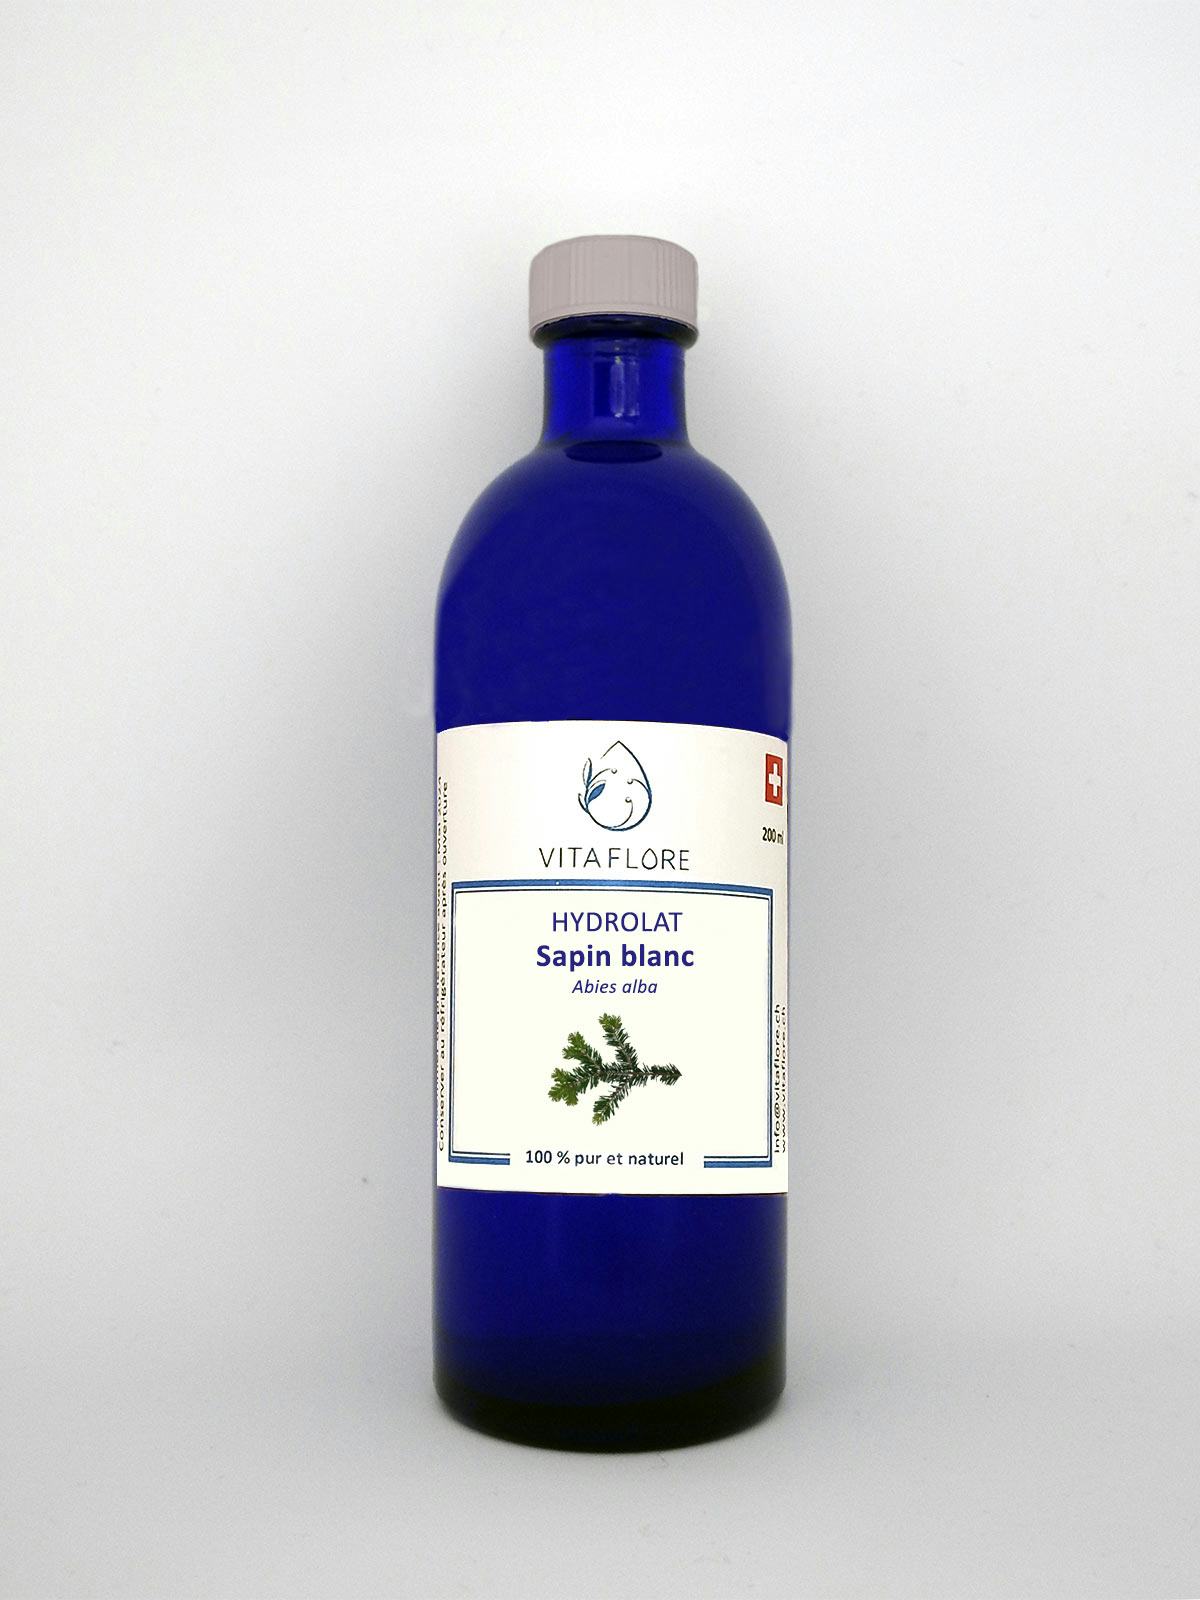 White fir hydrosol, artisanal product for direct sale in Switzerland